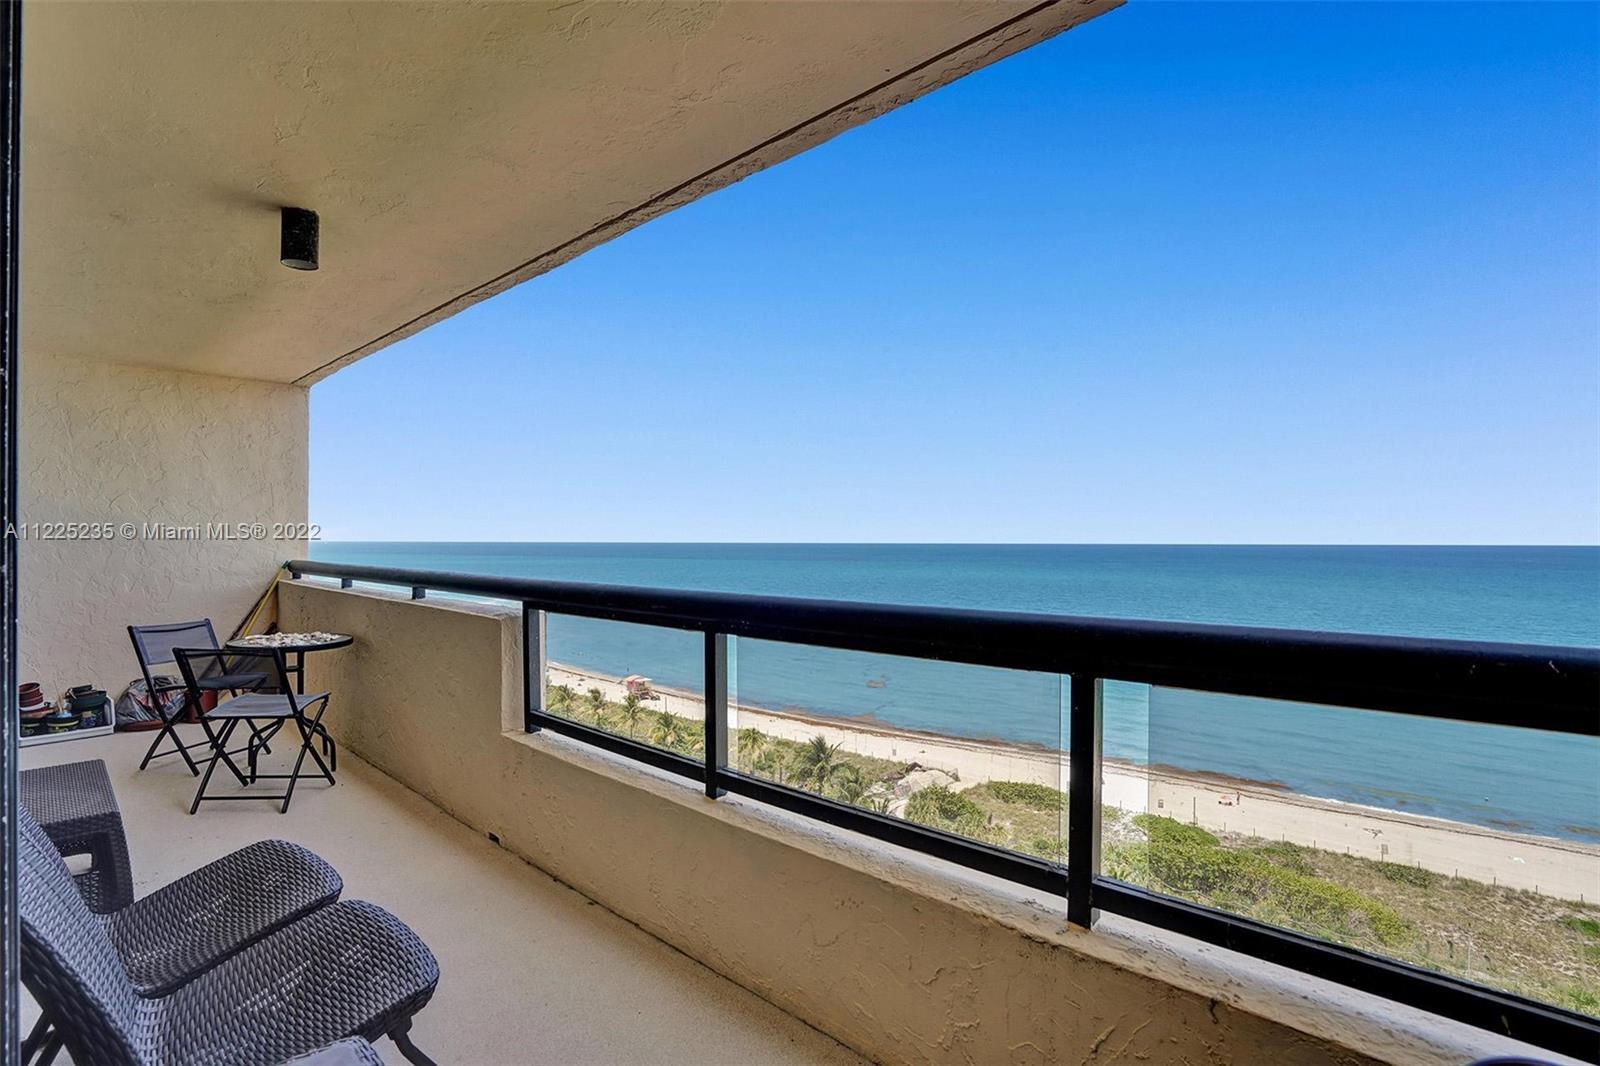 Relax on the balcony and enjoy the breathtaking views of the Atlantic Ocean.  The owner says her fav